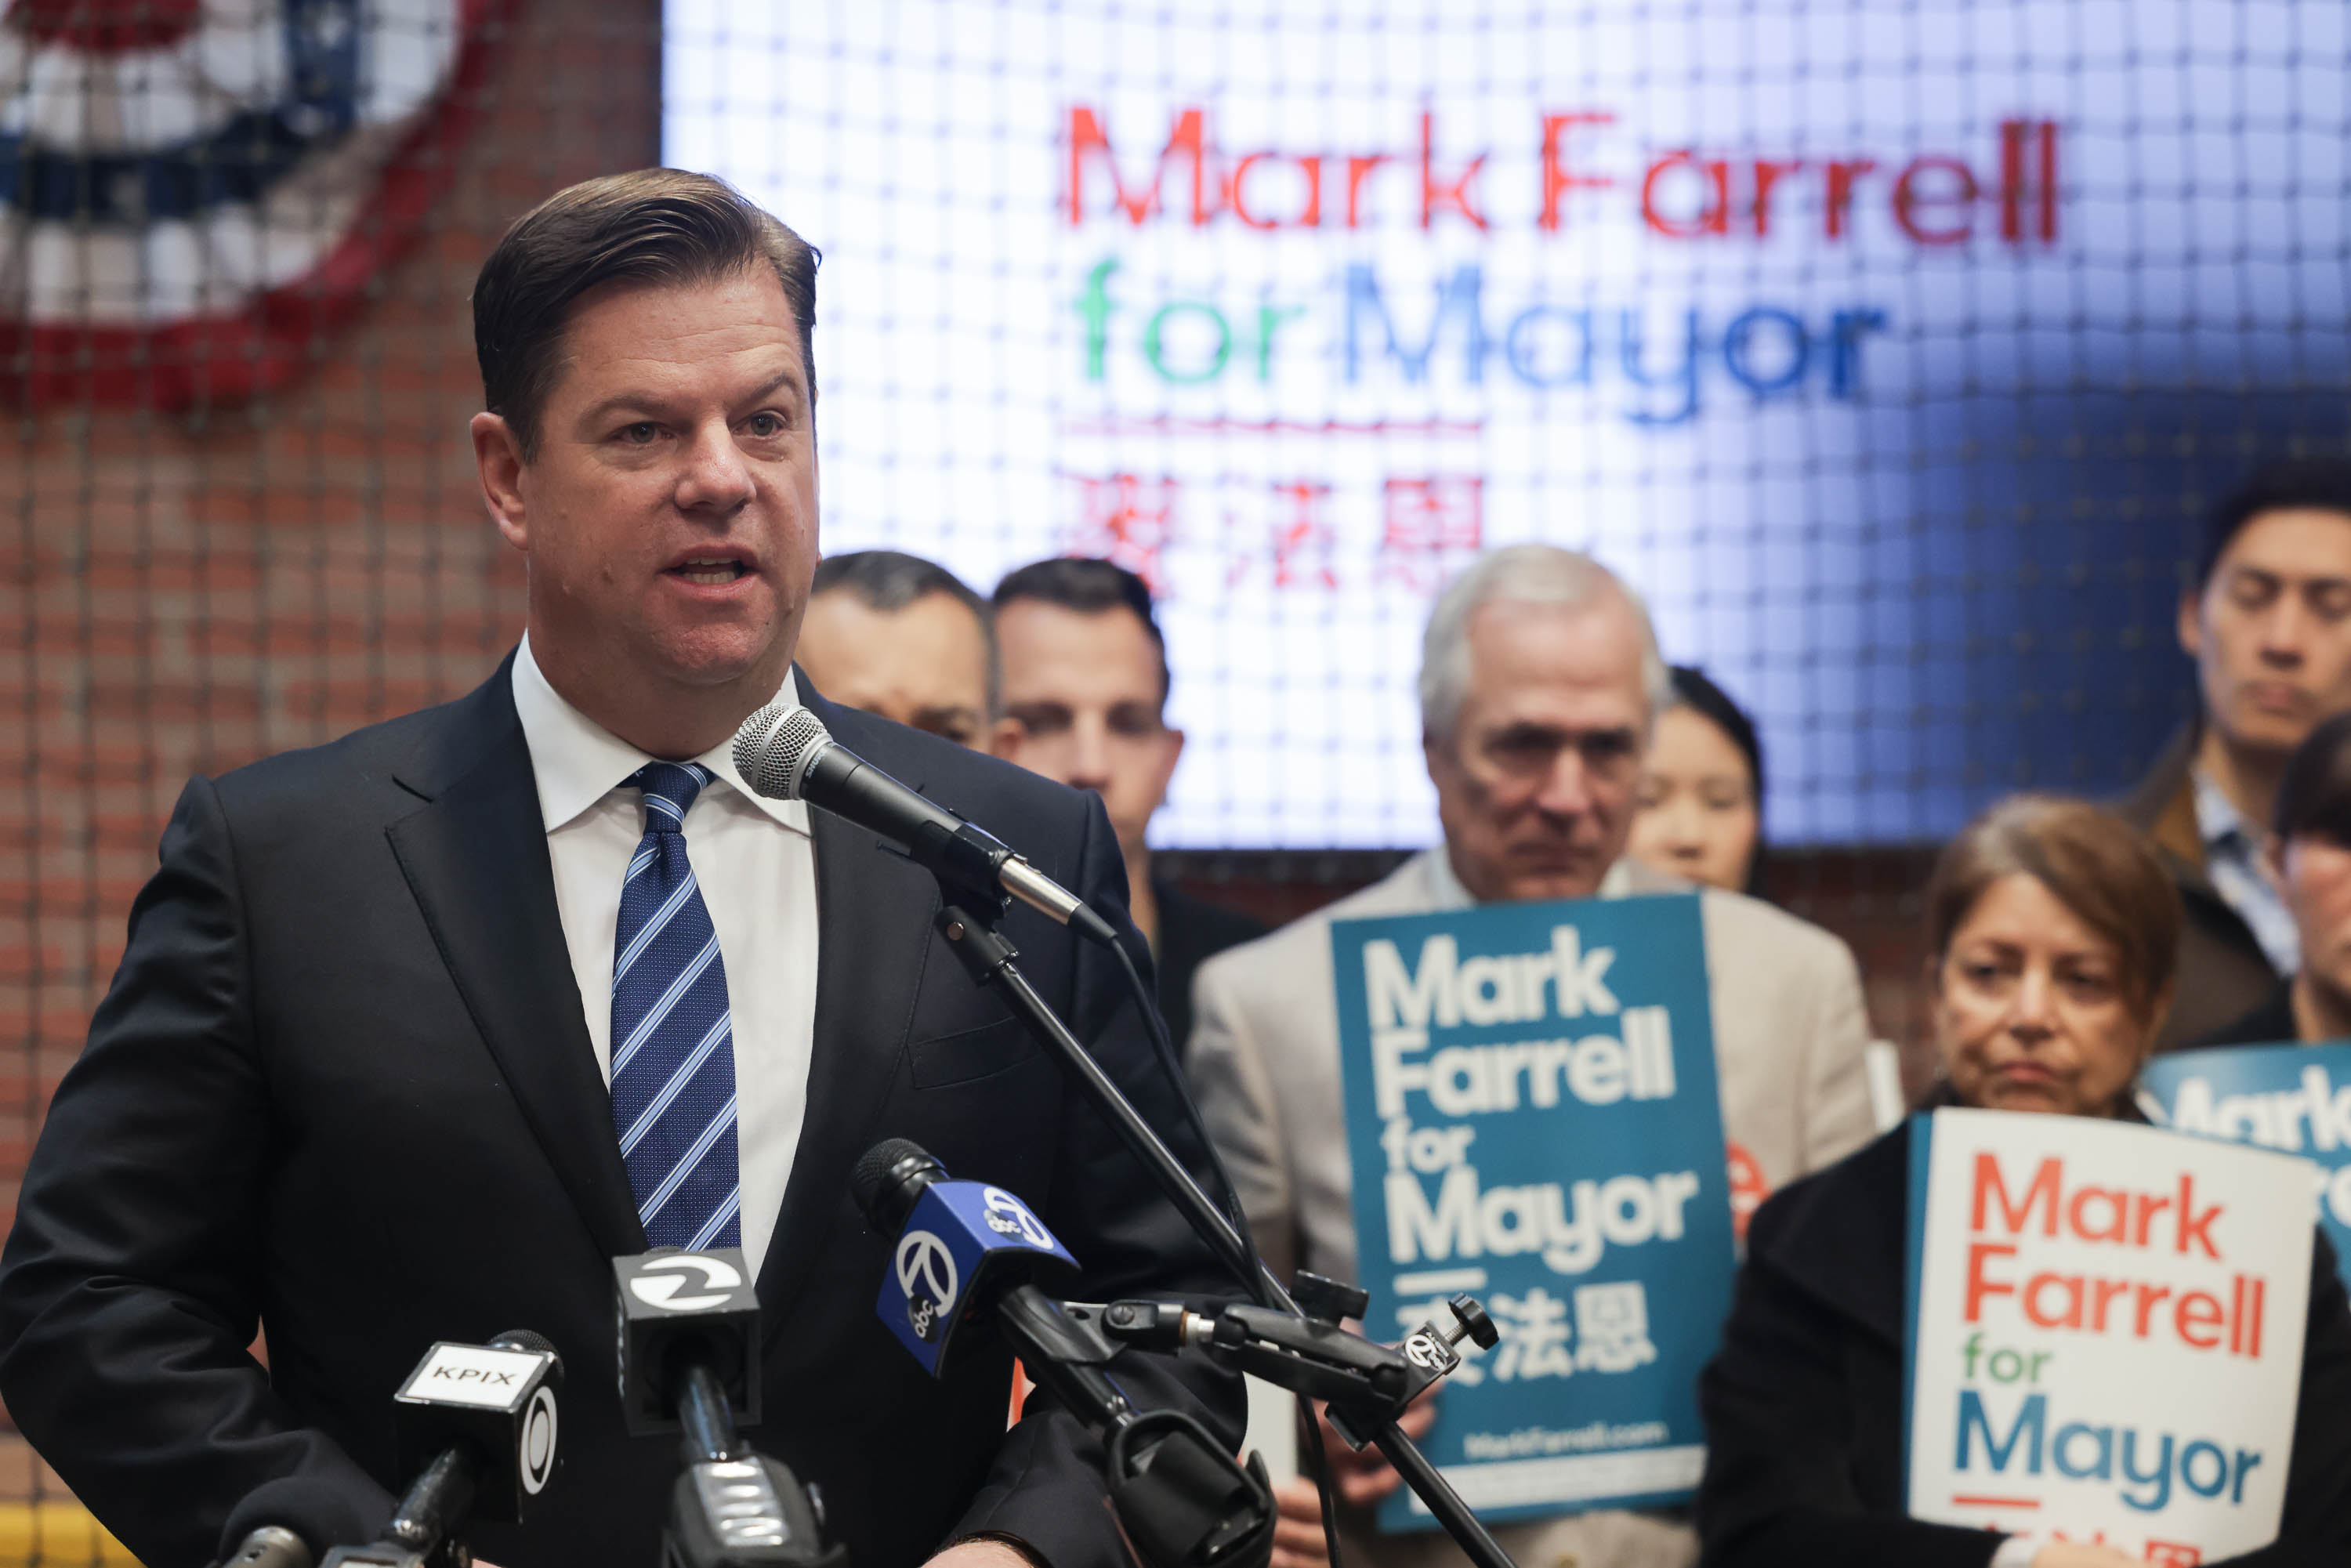 A man at a podium with a &quot;Mark Farrell for Mayor&quot; sign and supporters behind him.